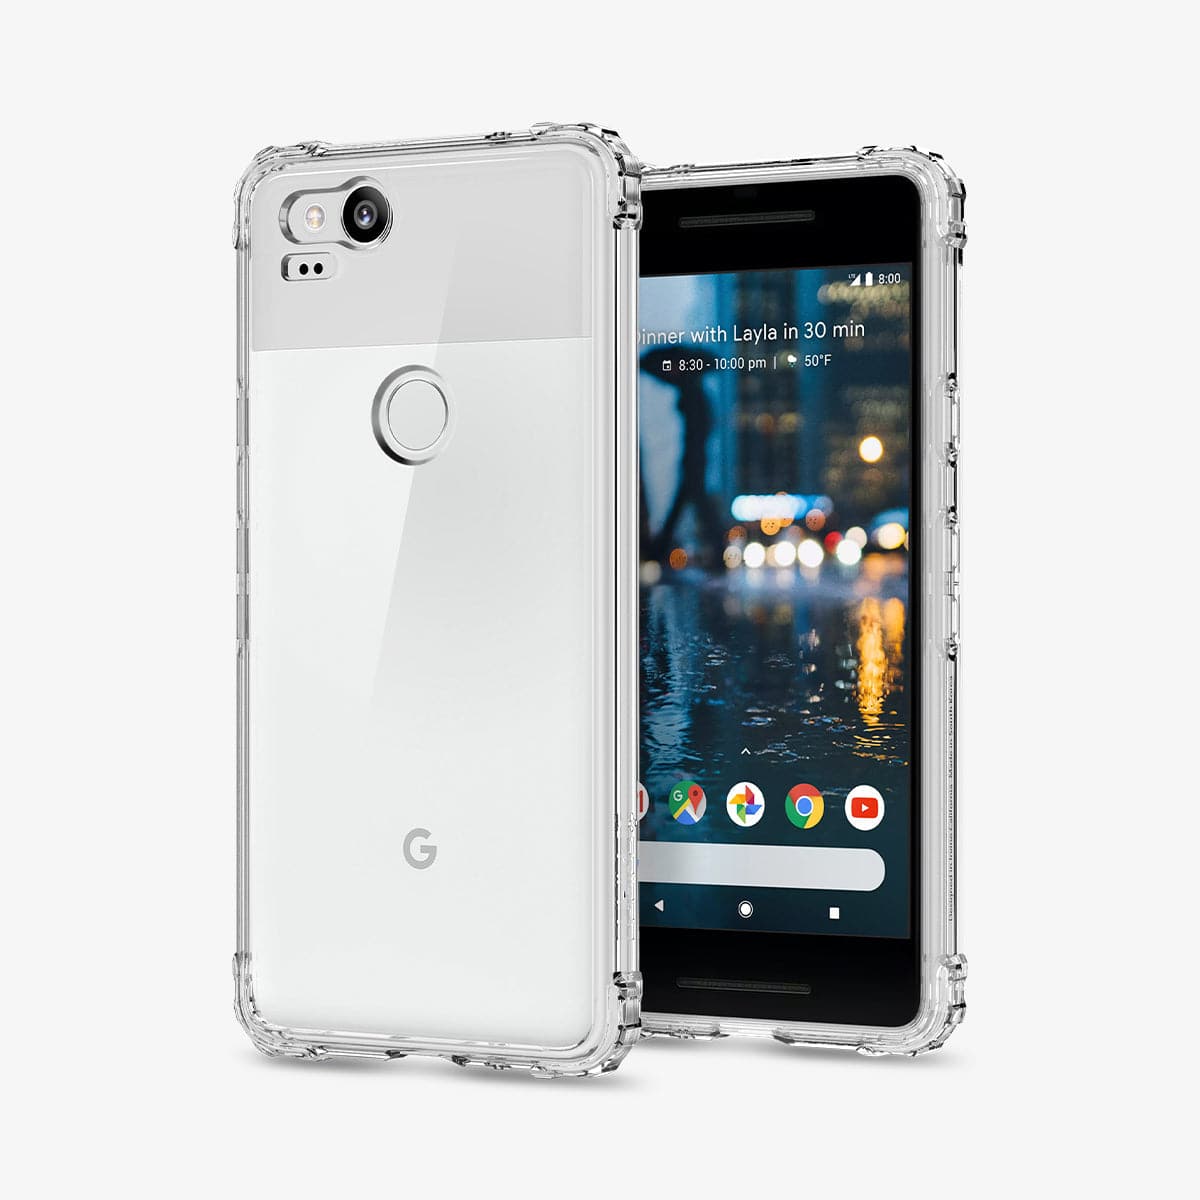 F16CS22252 - Pixel 2 Case Crystal Shell in crystal clear showing the back and front